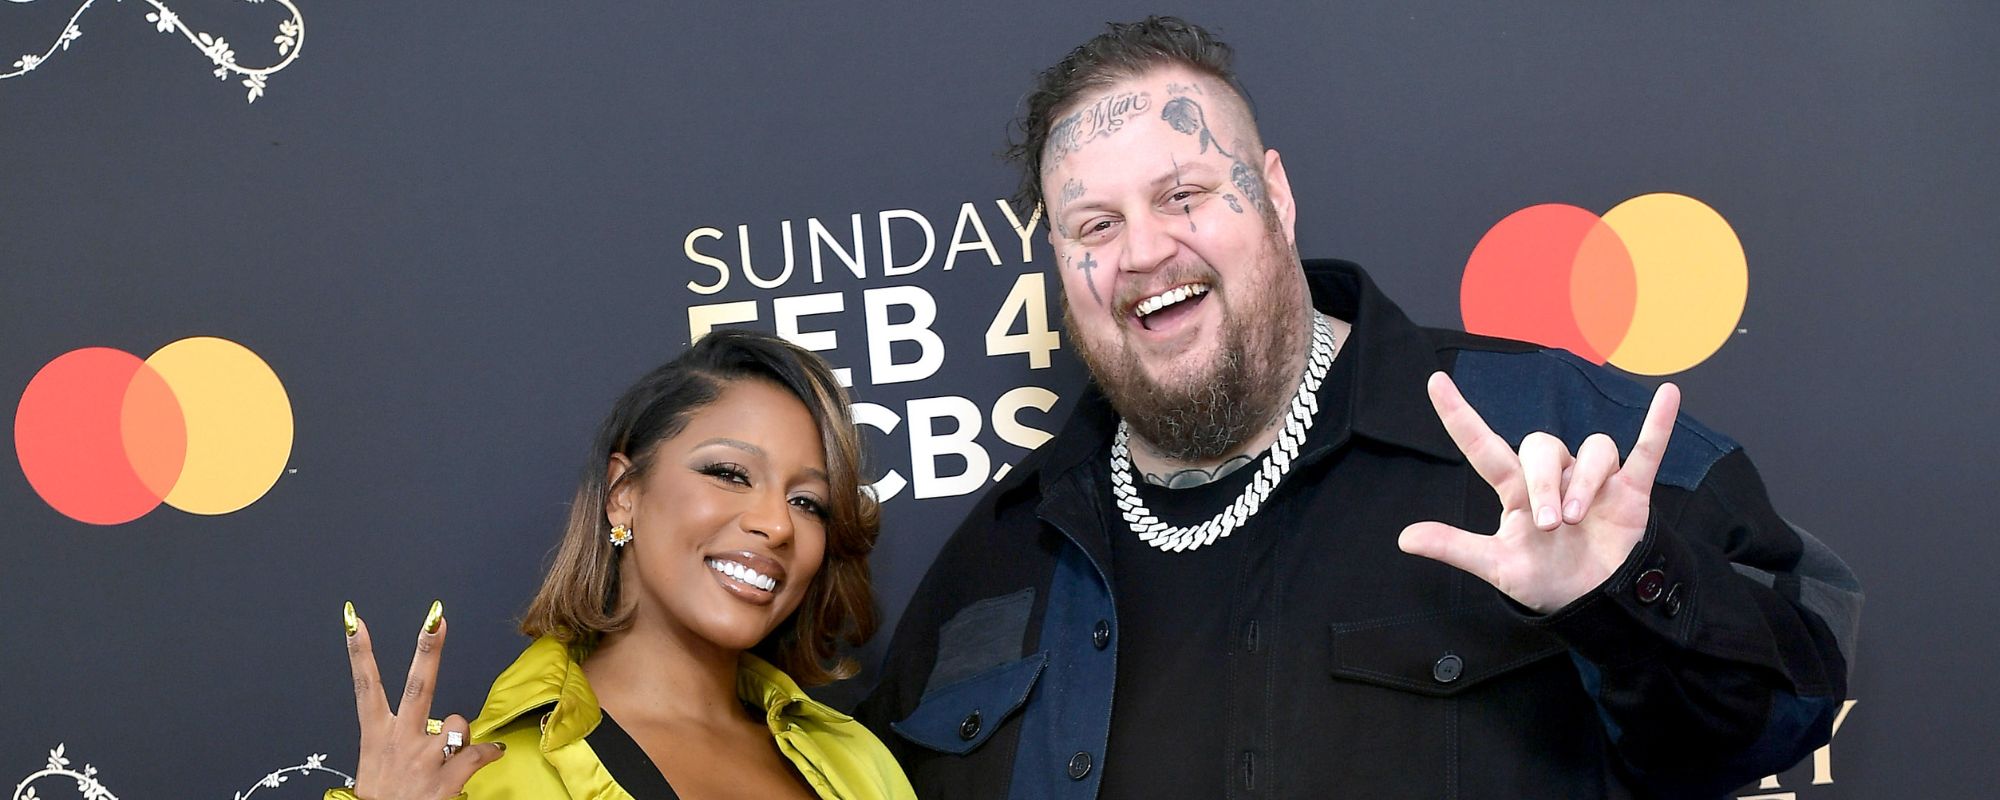 Jelly Roll Takes to Social Media to Address Uproar Over GRAMMYs Loss: “Just So We Are Clear”